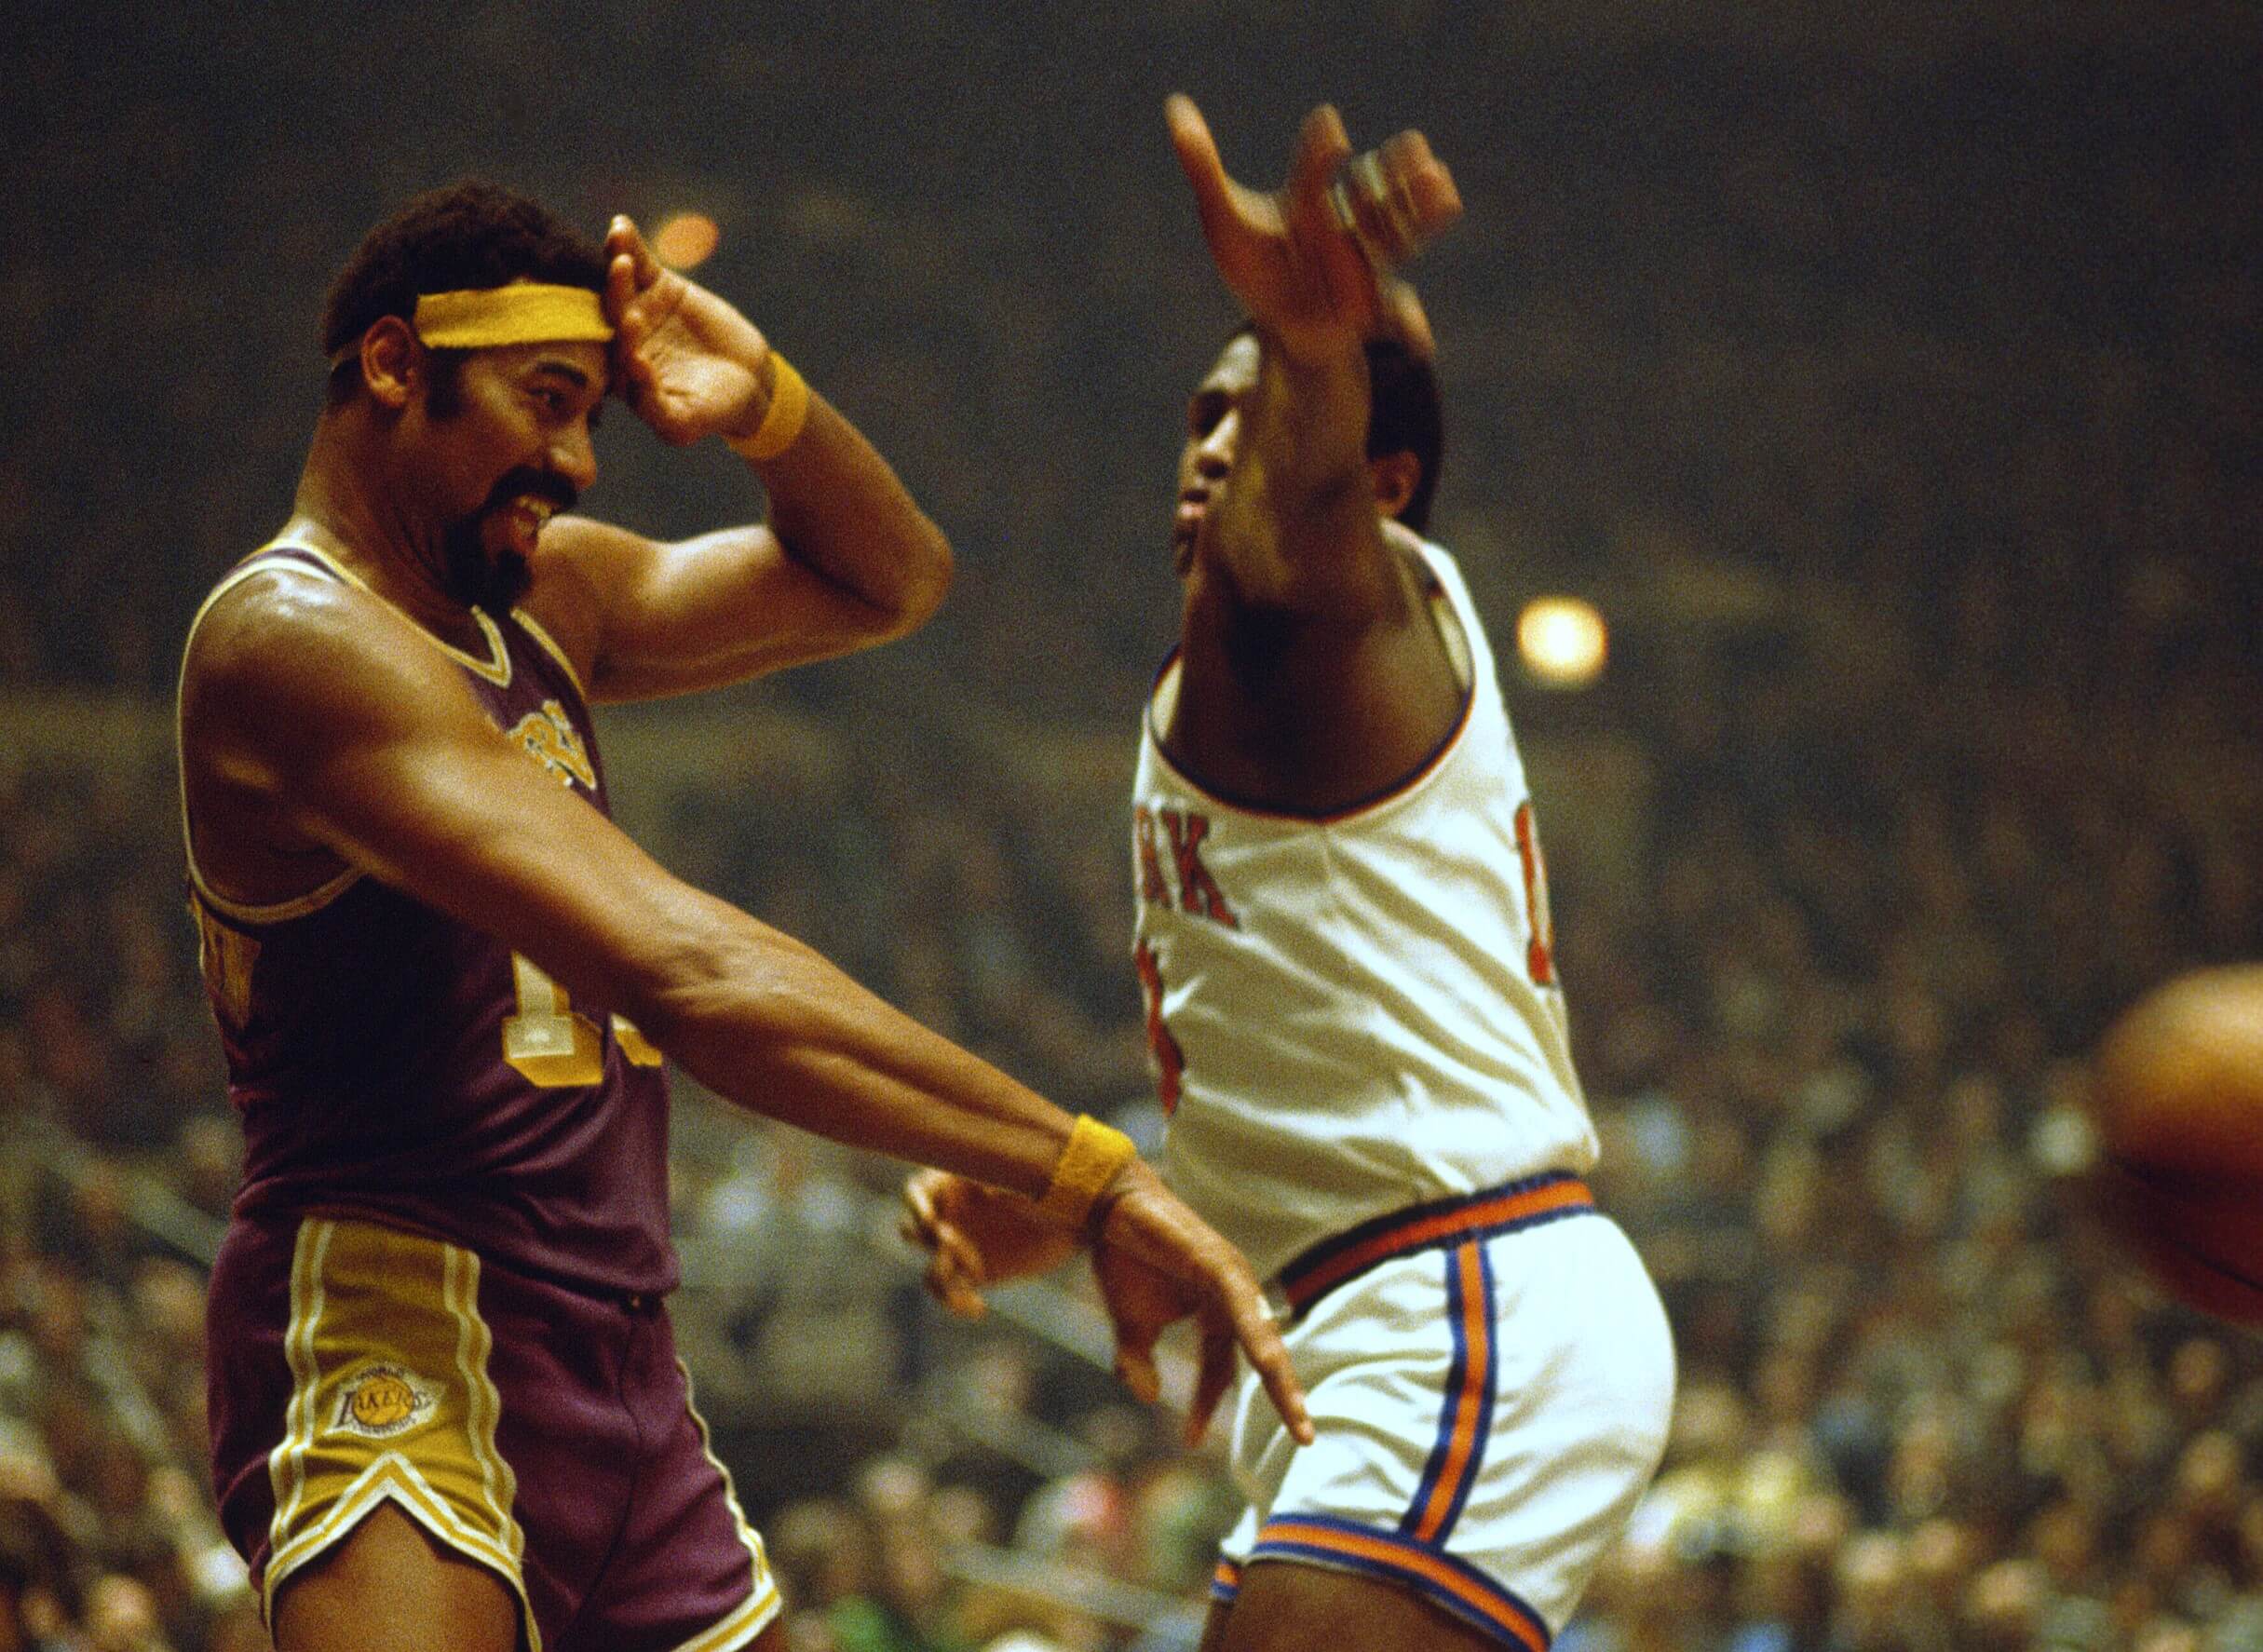 Wilt Chamberlain of the Los Angeles Lakers battles for position with Willis Reed of the New York Knicks.